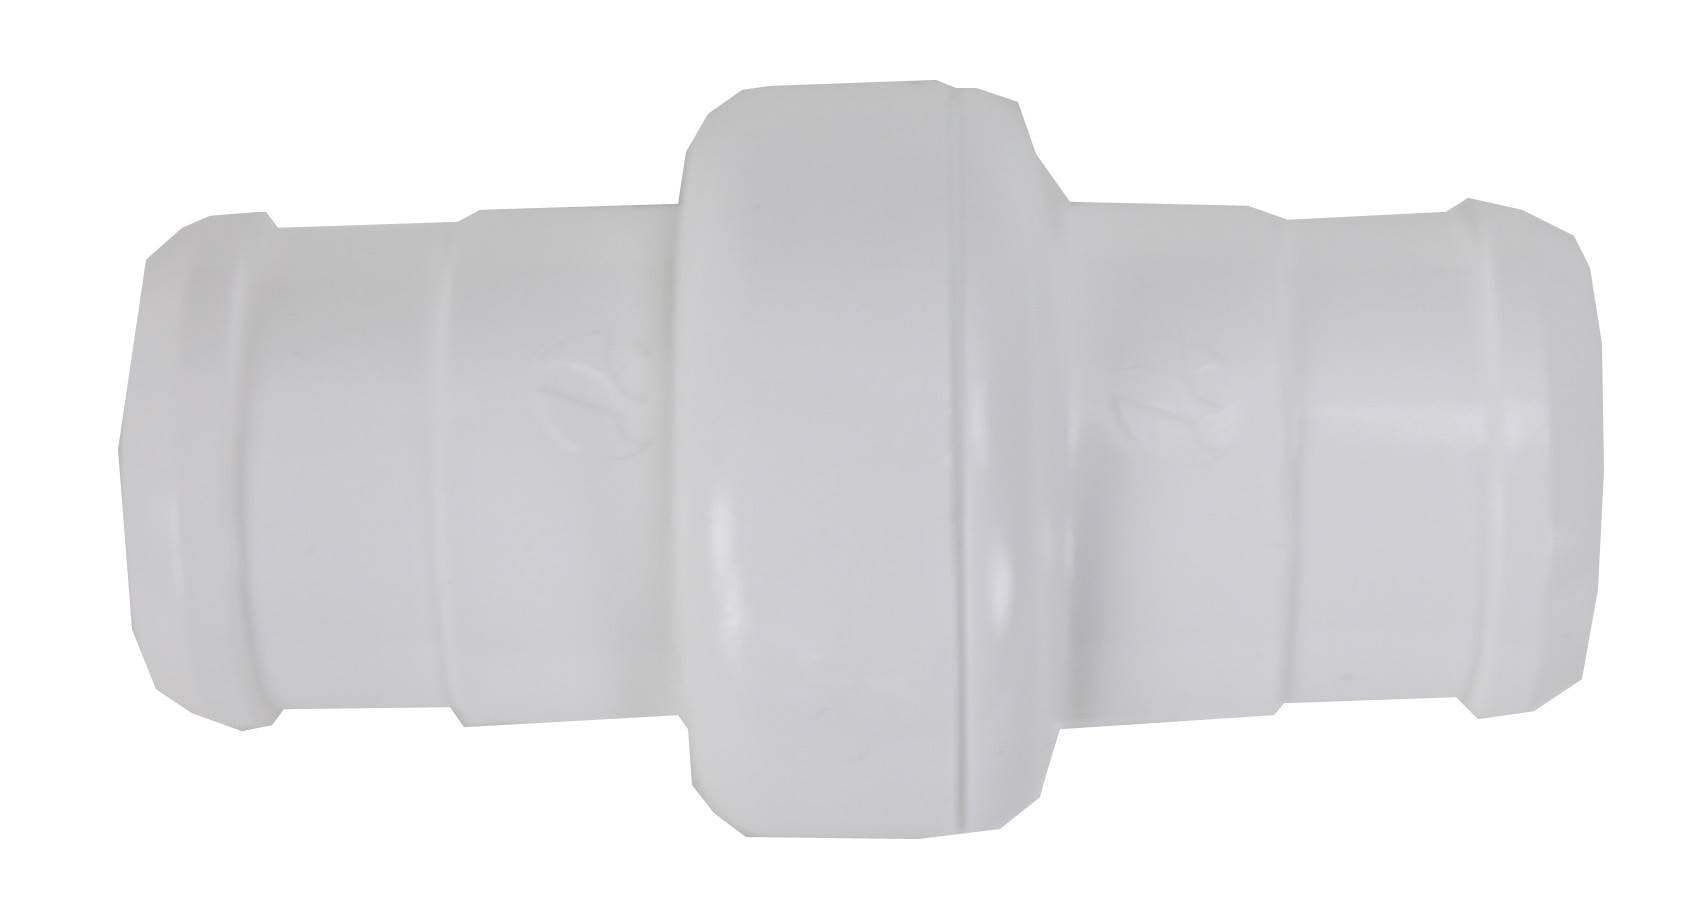 Polaris 360 Feed Hose Swivel Replacement for Pool Cleaner Part 9-100-3002 